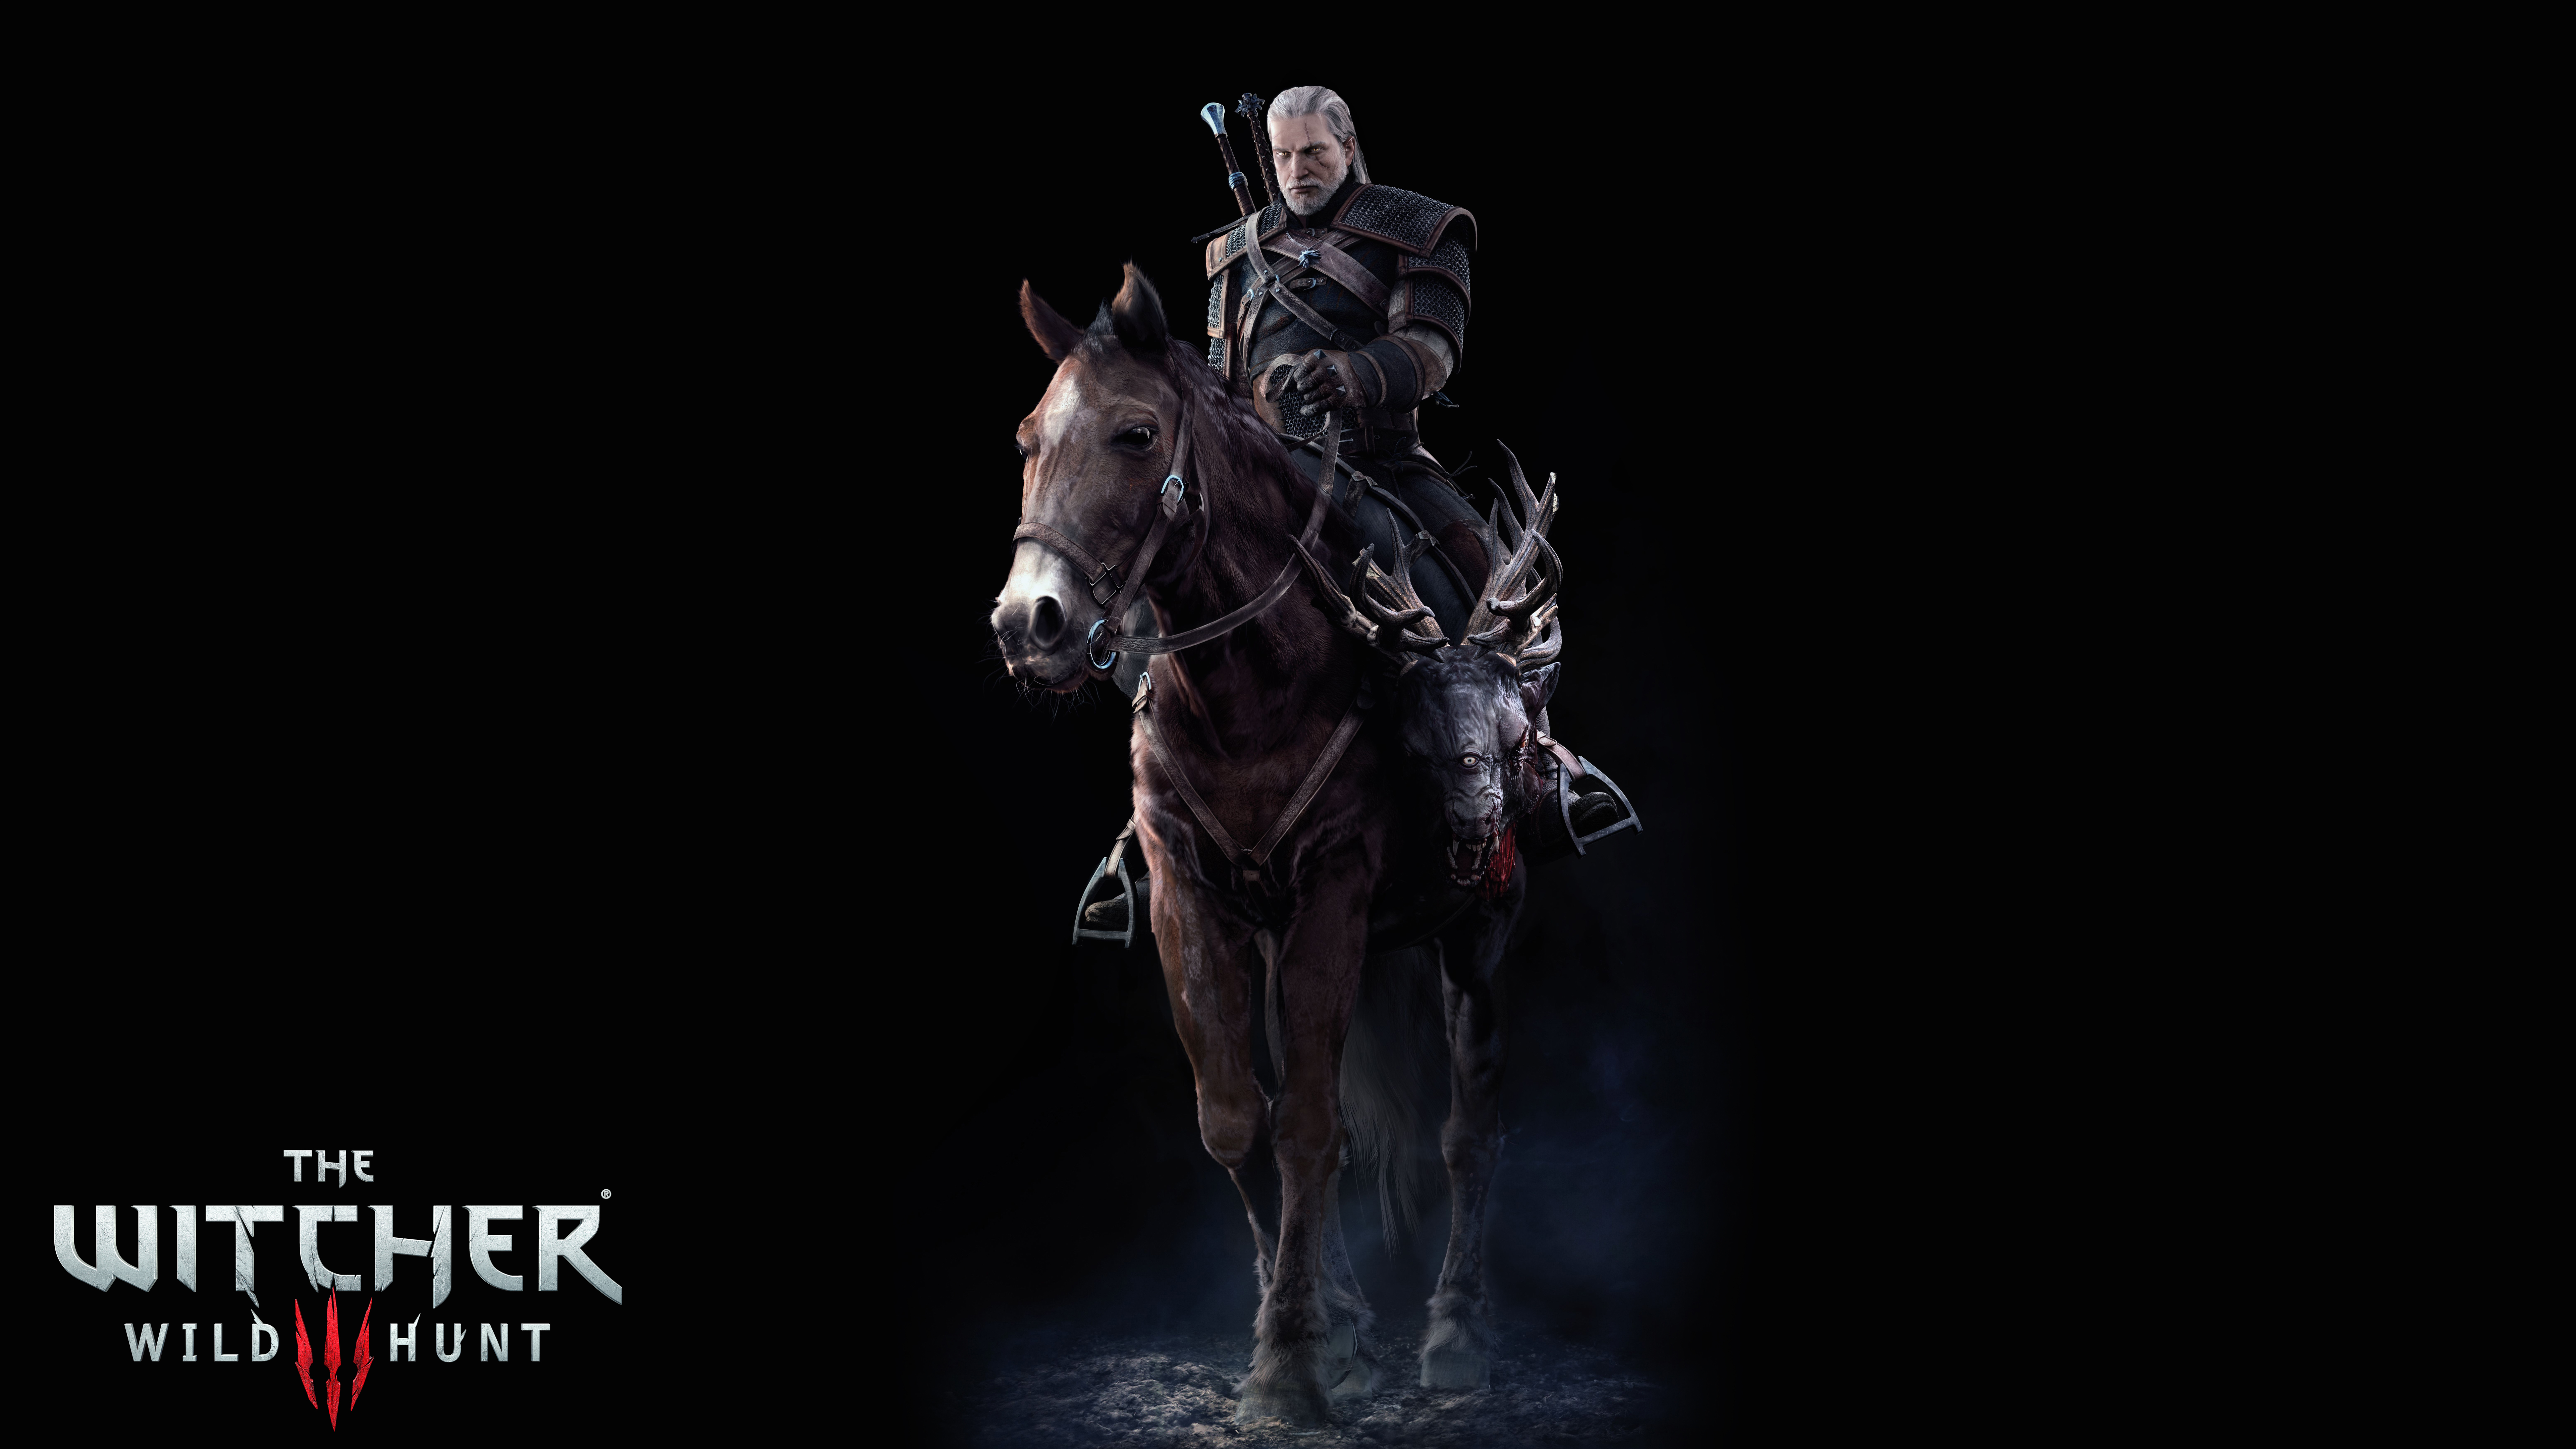 the witcher 3: wild hunt, the witcher, geralt of rivia, video game